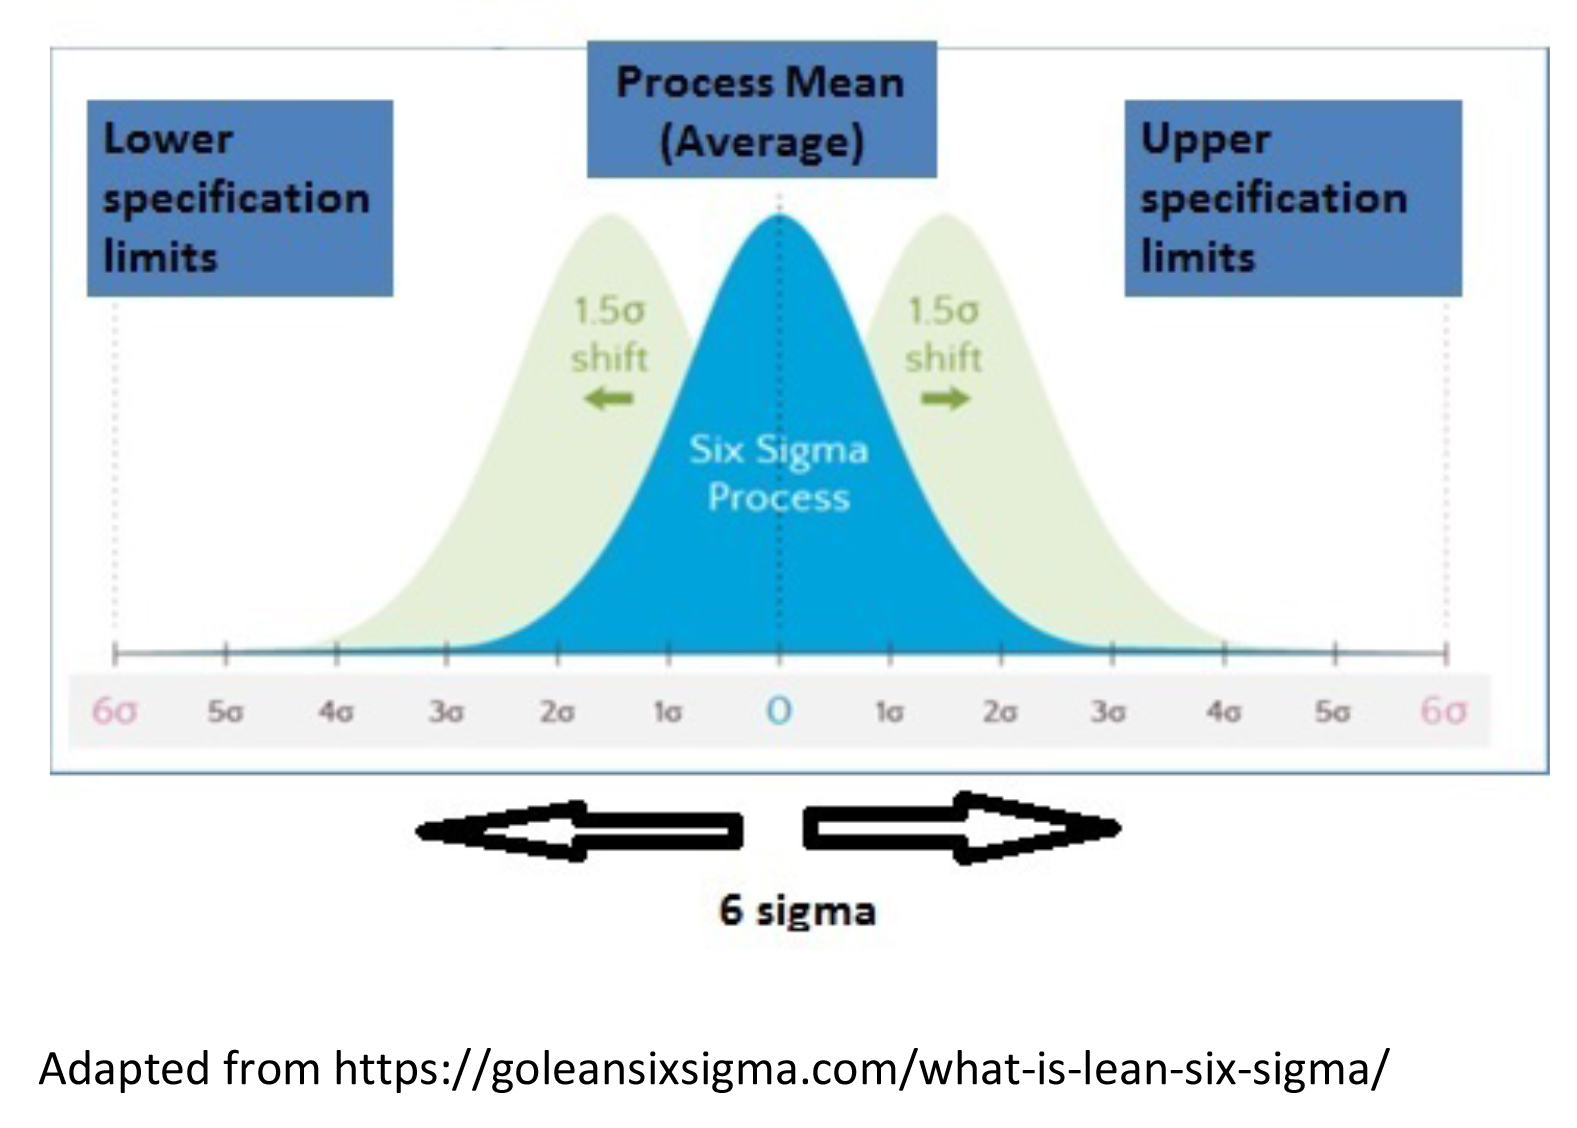 Case study in six sigma methodology manufacturing quality improvement and guidance for managers